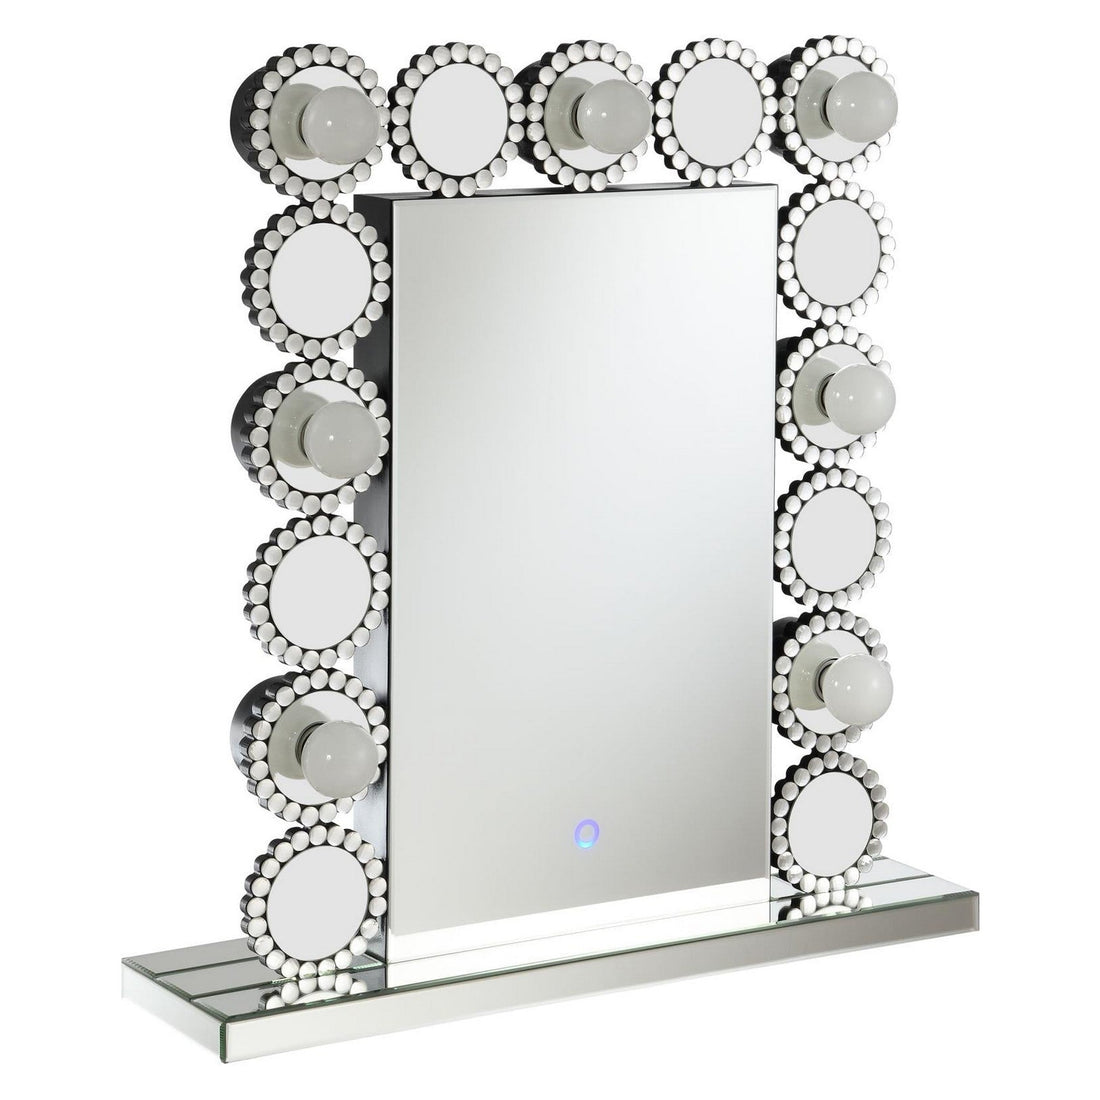 Aghes Rectangular Table Mirror with LED Lighting Mirror 961624